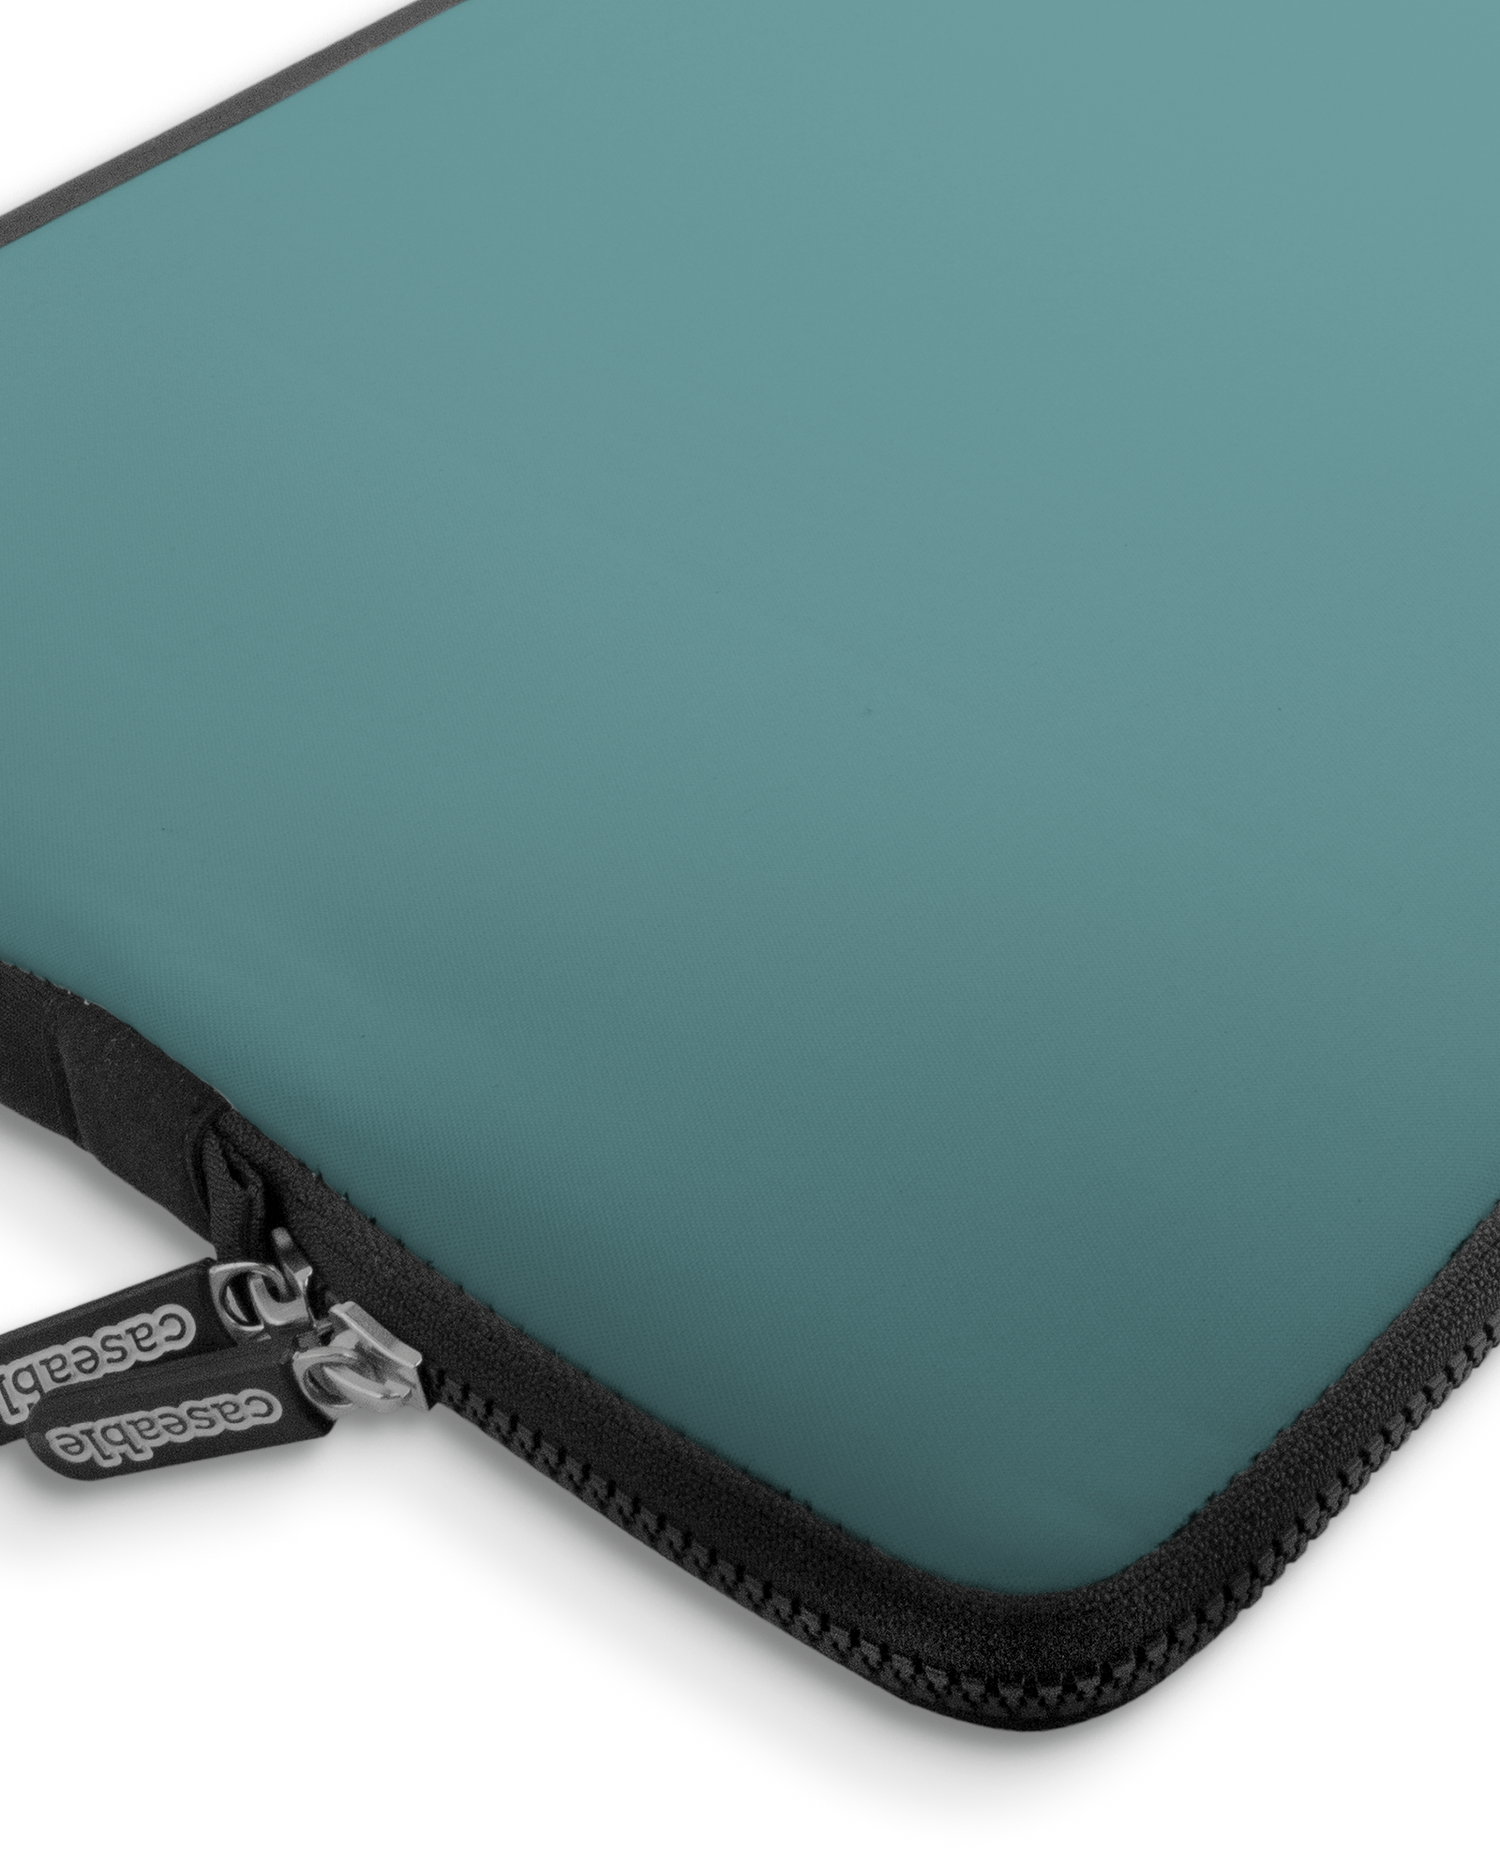 TURQUOISE Premium Laptop Bag 17 inch with device inside